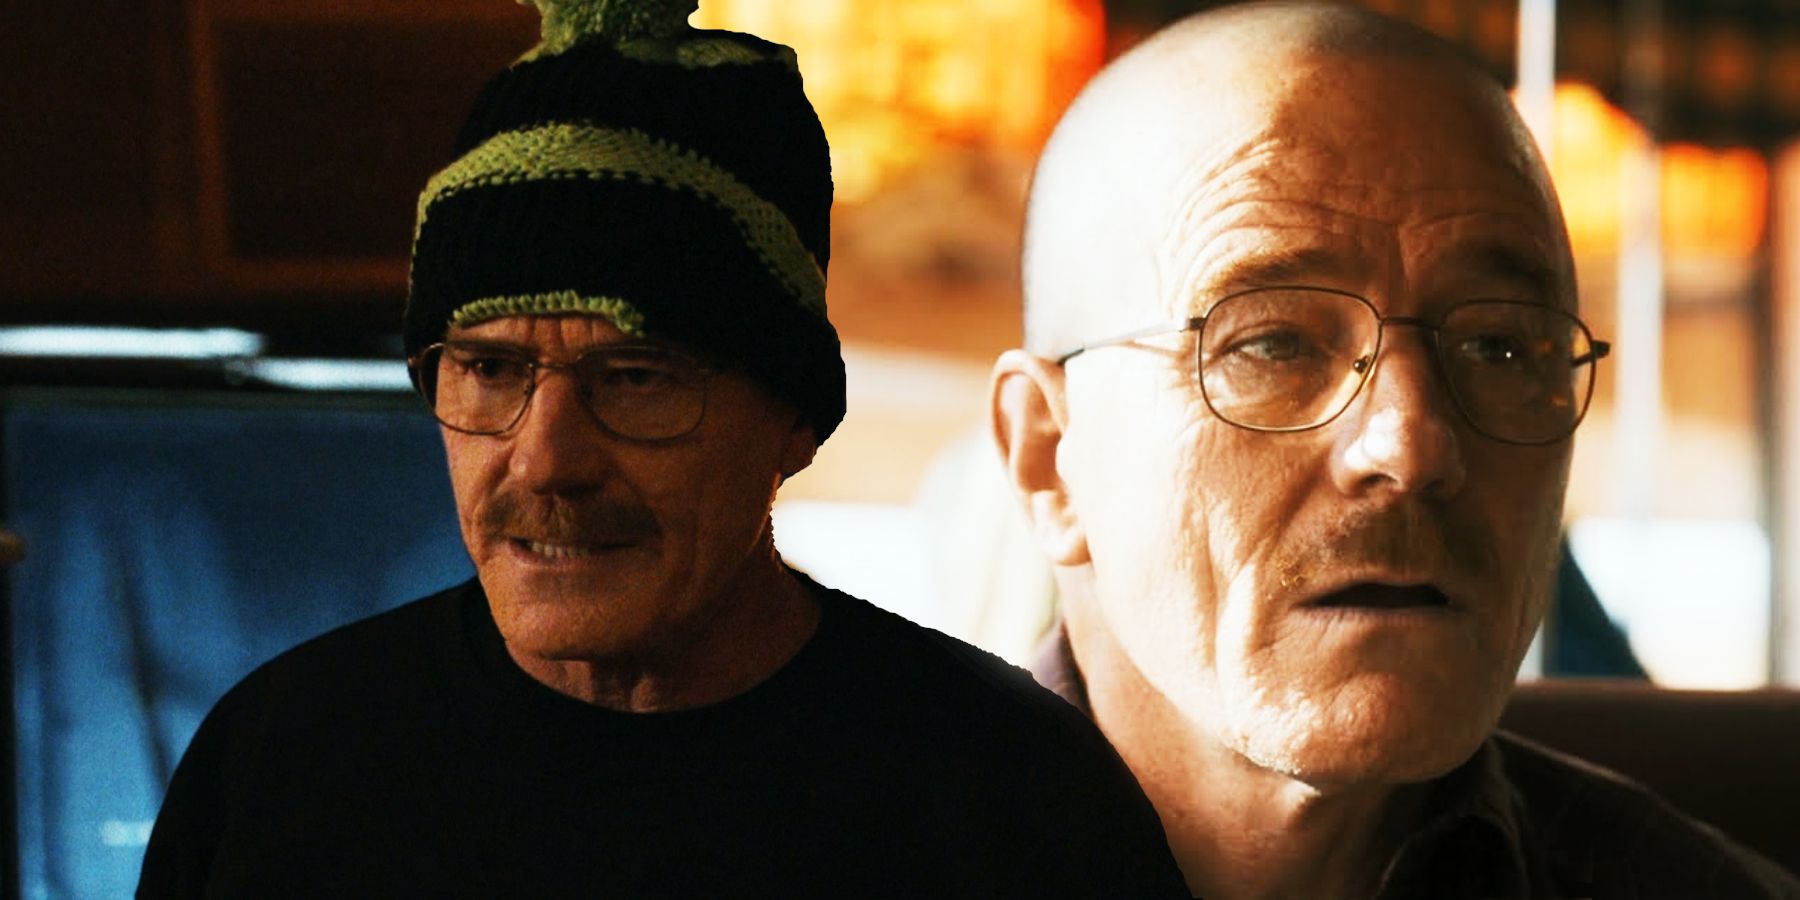 Bryan Cranston as Walter White in Better Call Saul and El Camino